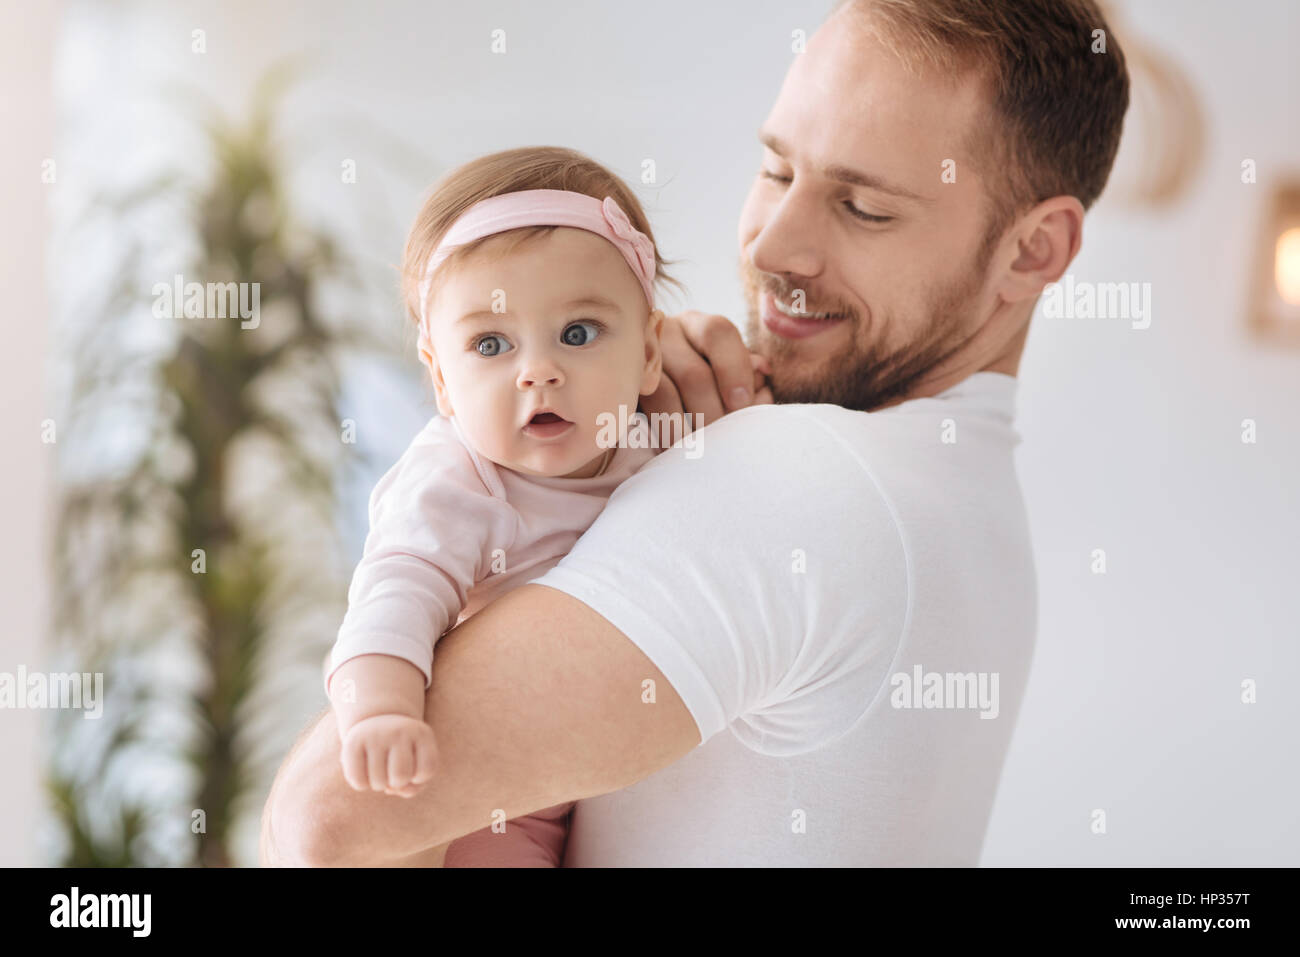 Curious kid in the arms of the father Stock Photo